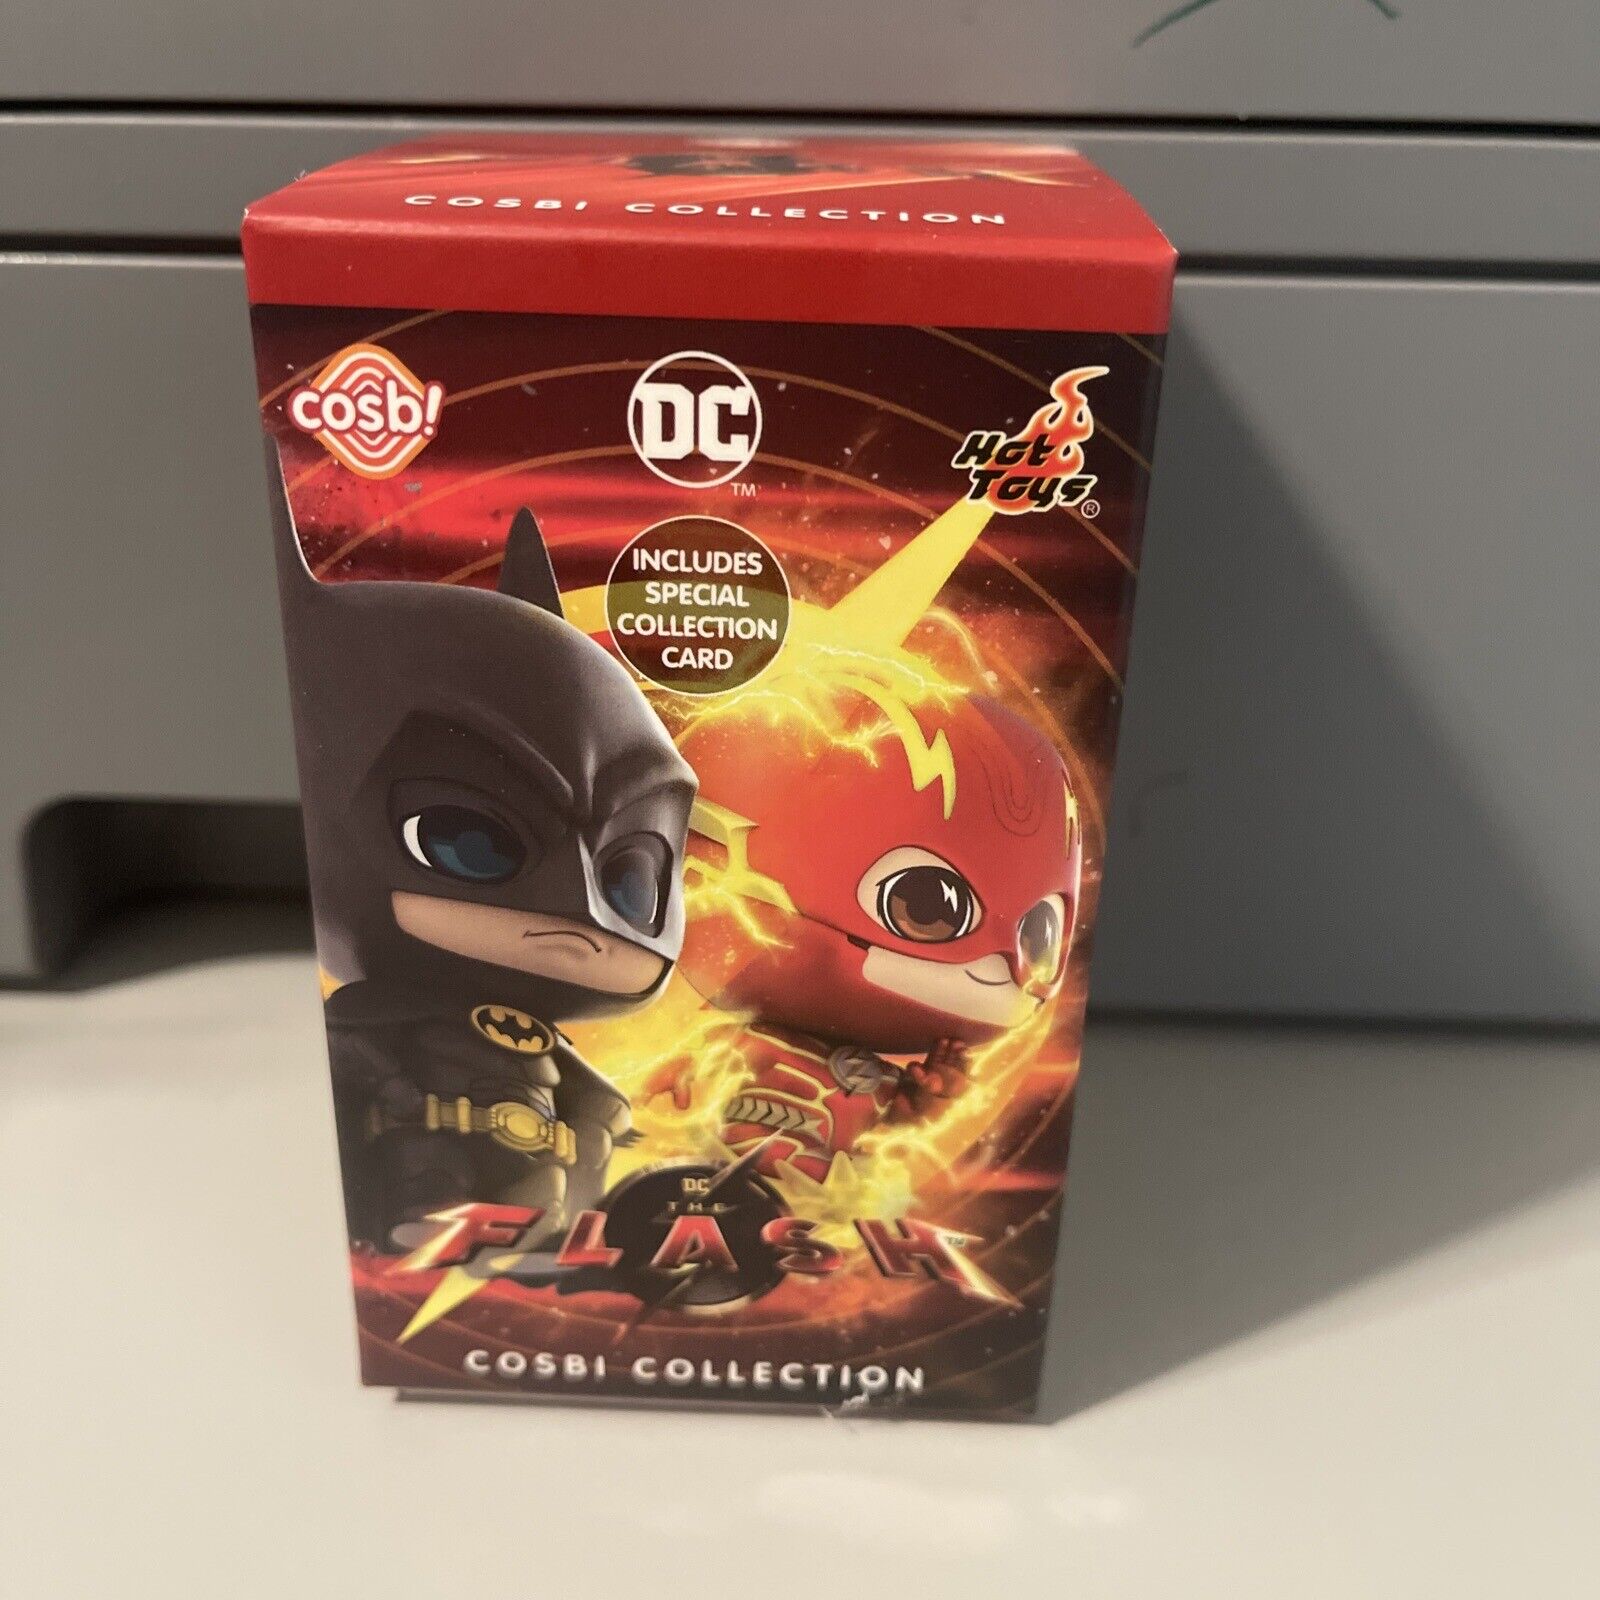 Hot Toys DC The Flash Movie Cosbi Collection Blind Box Exclusive Chance of Chase